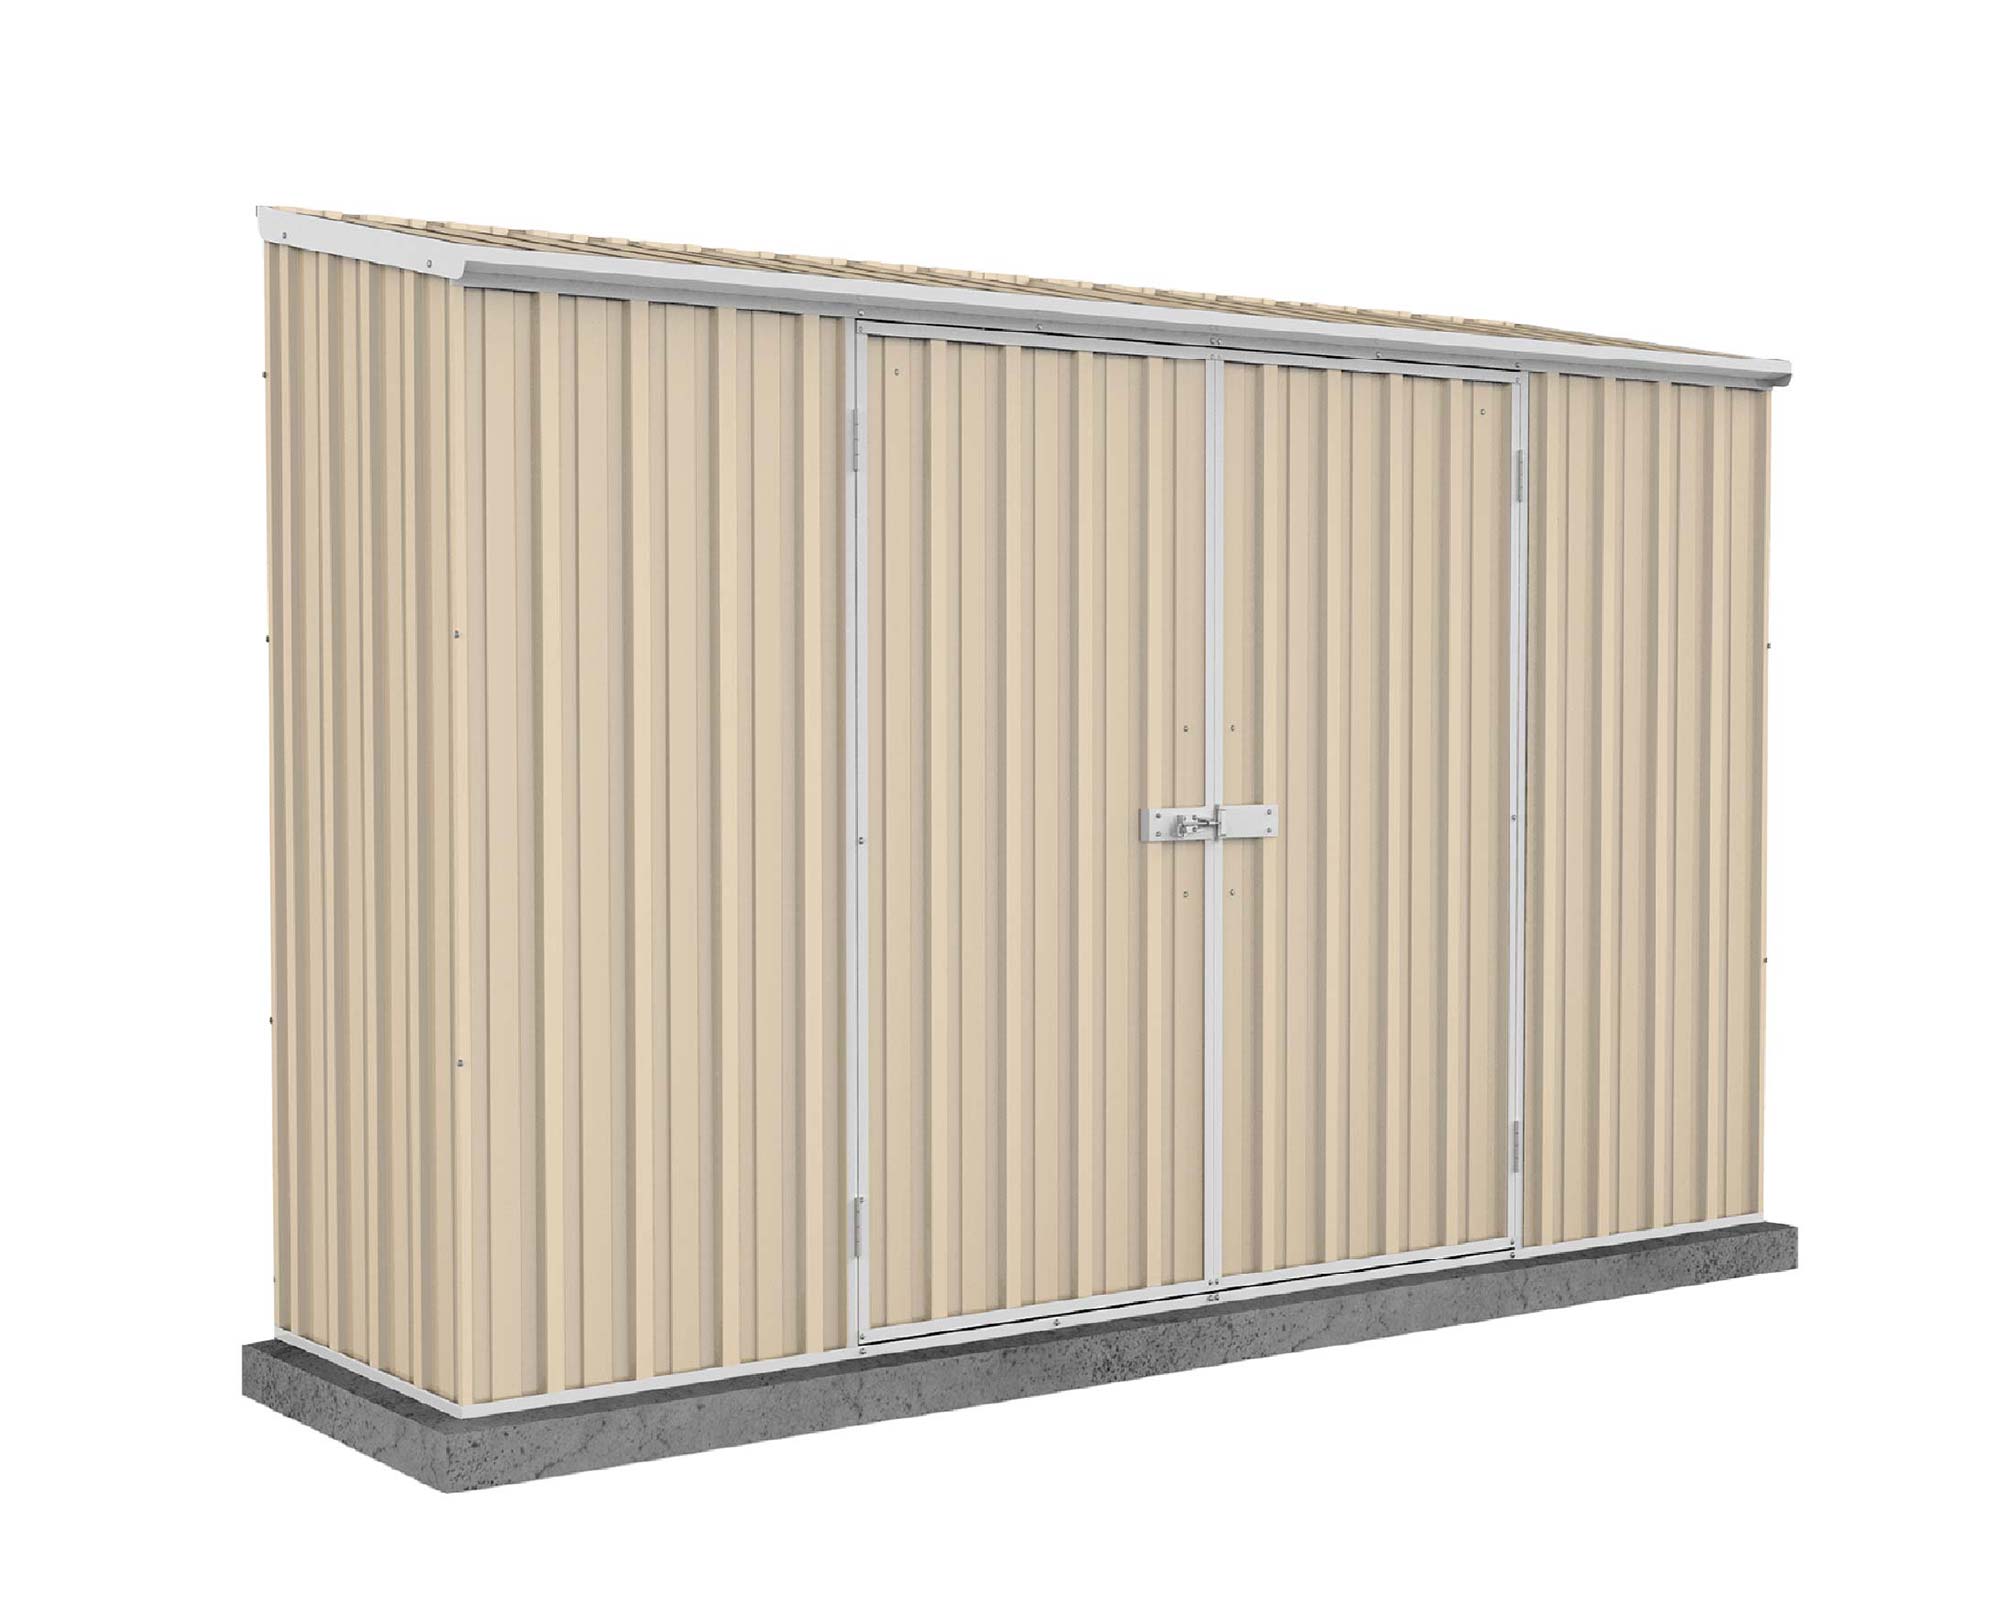 Economy Space Saver Shed 300cm wide  x 78cm deep  x 195cm tall in Cream ABSCO